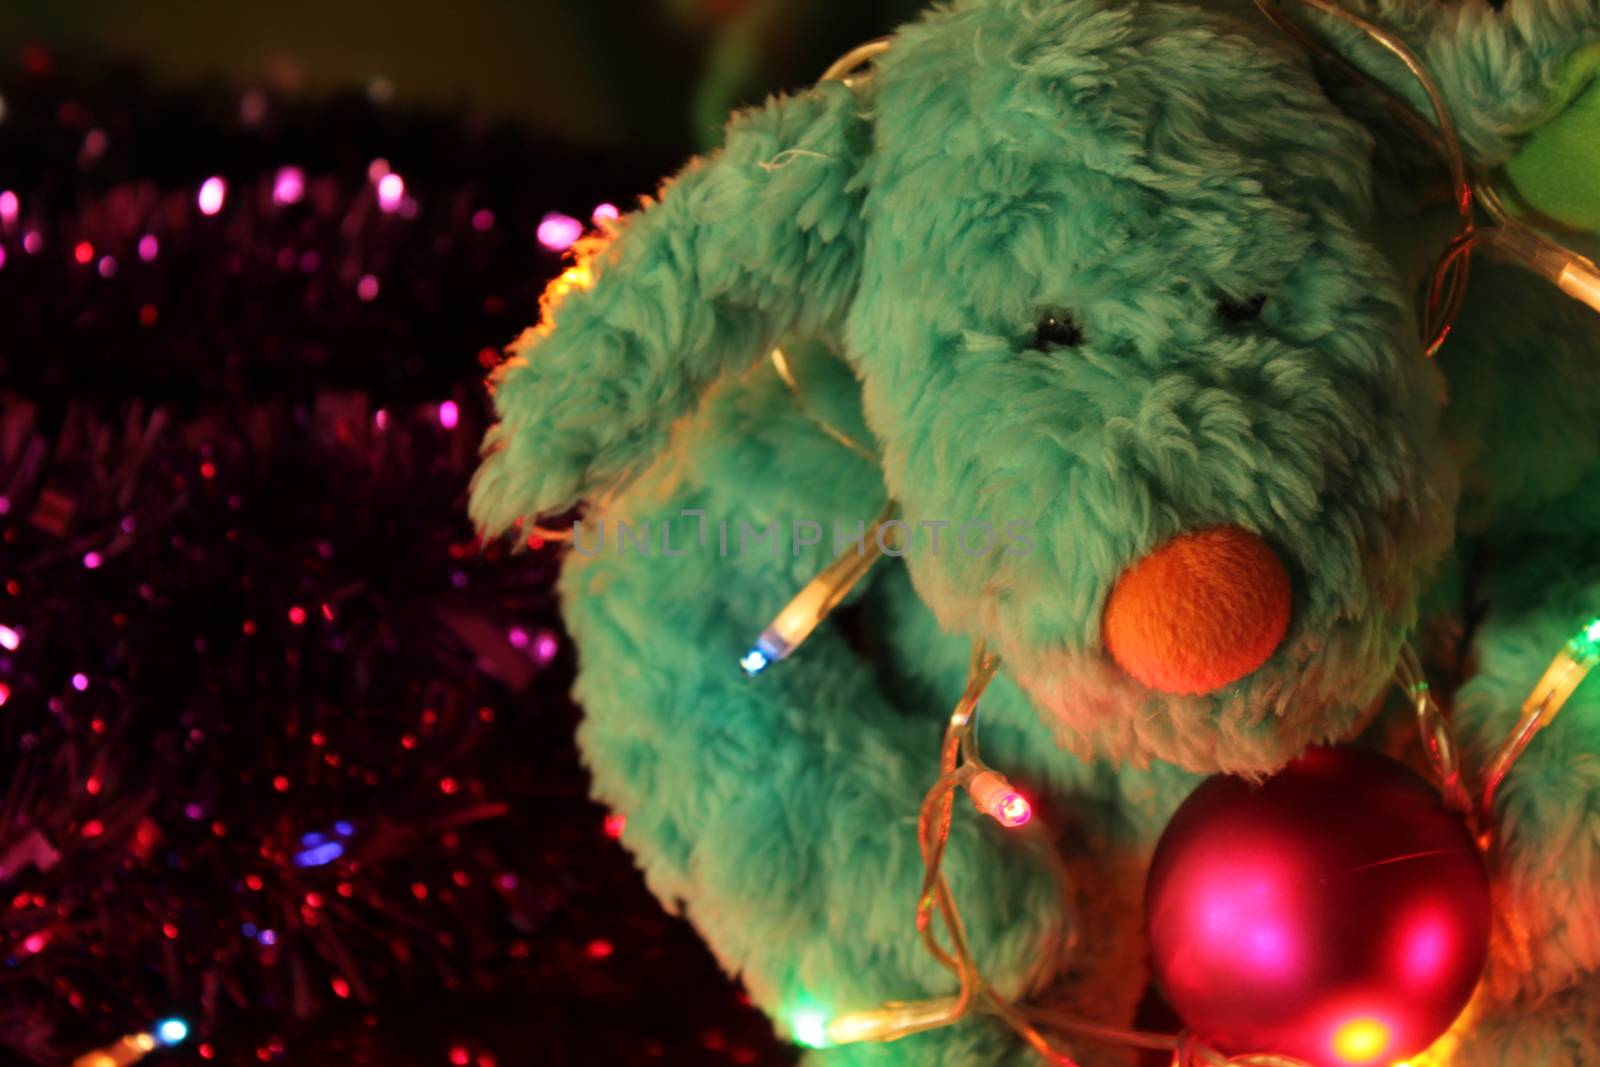 Teddy bear with Christmas tree balls, garlands and other colorful decorative elements